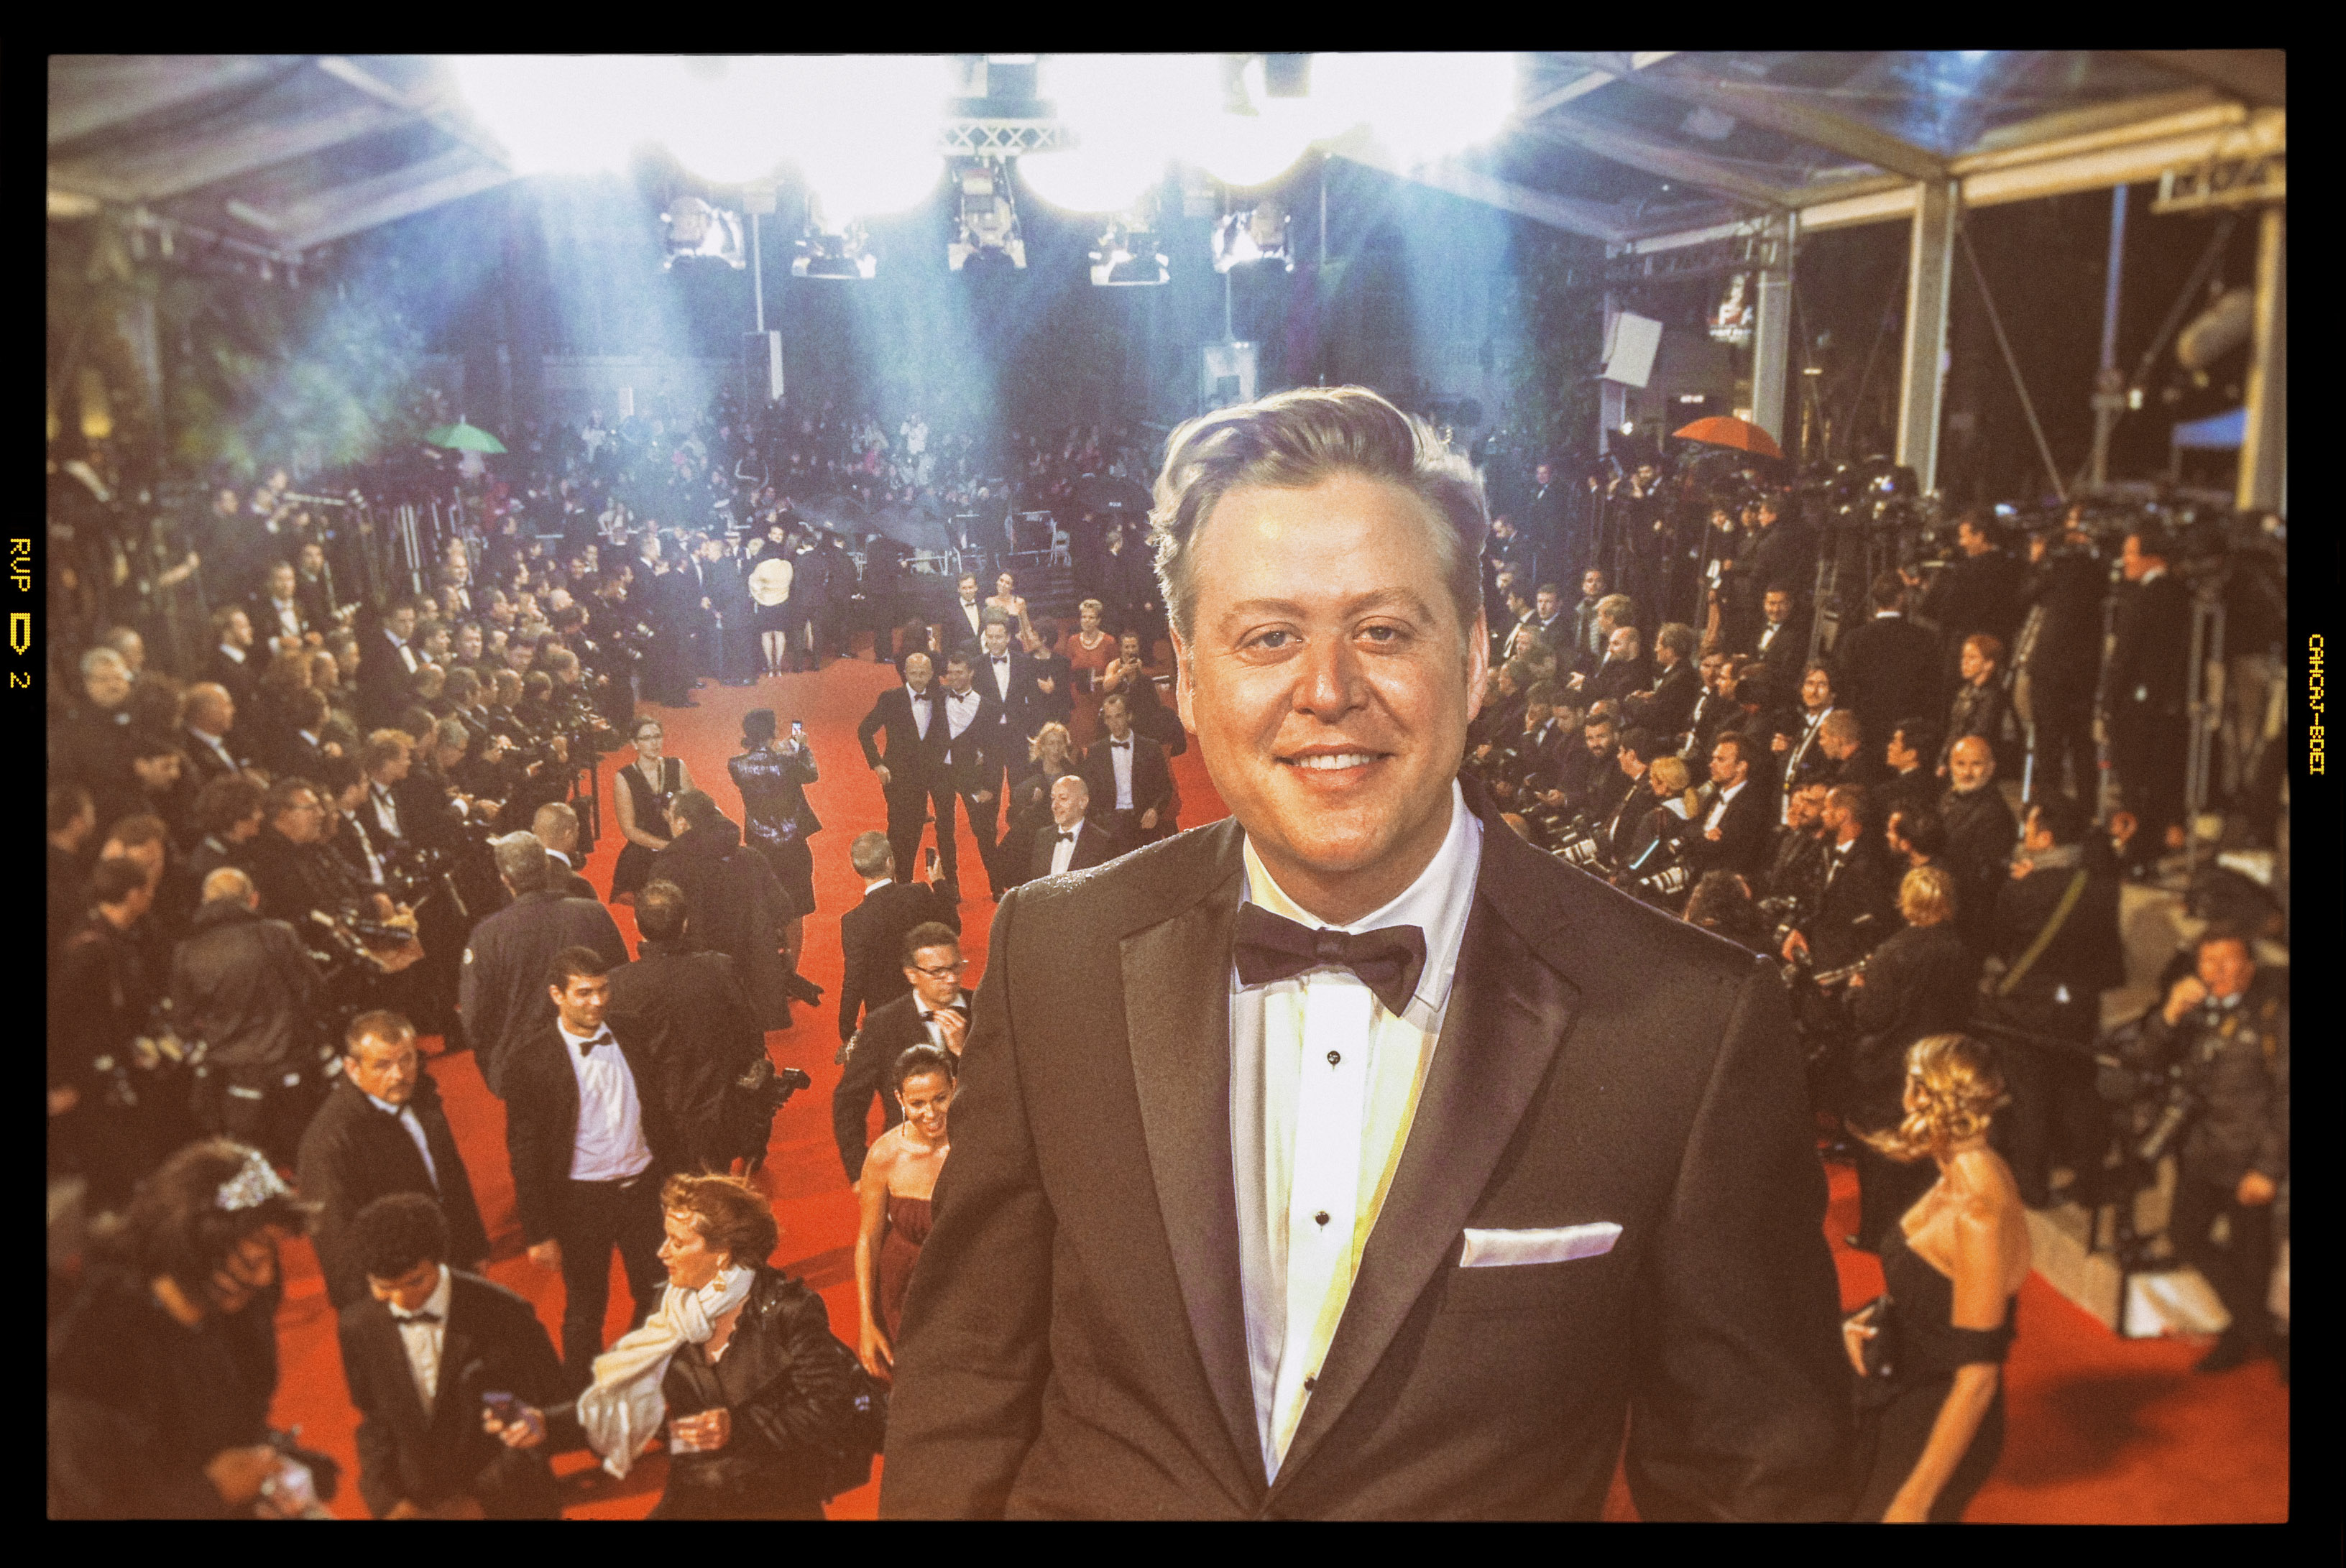 Cannes red carpet premiere of MAPS TO THE STARS